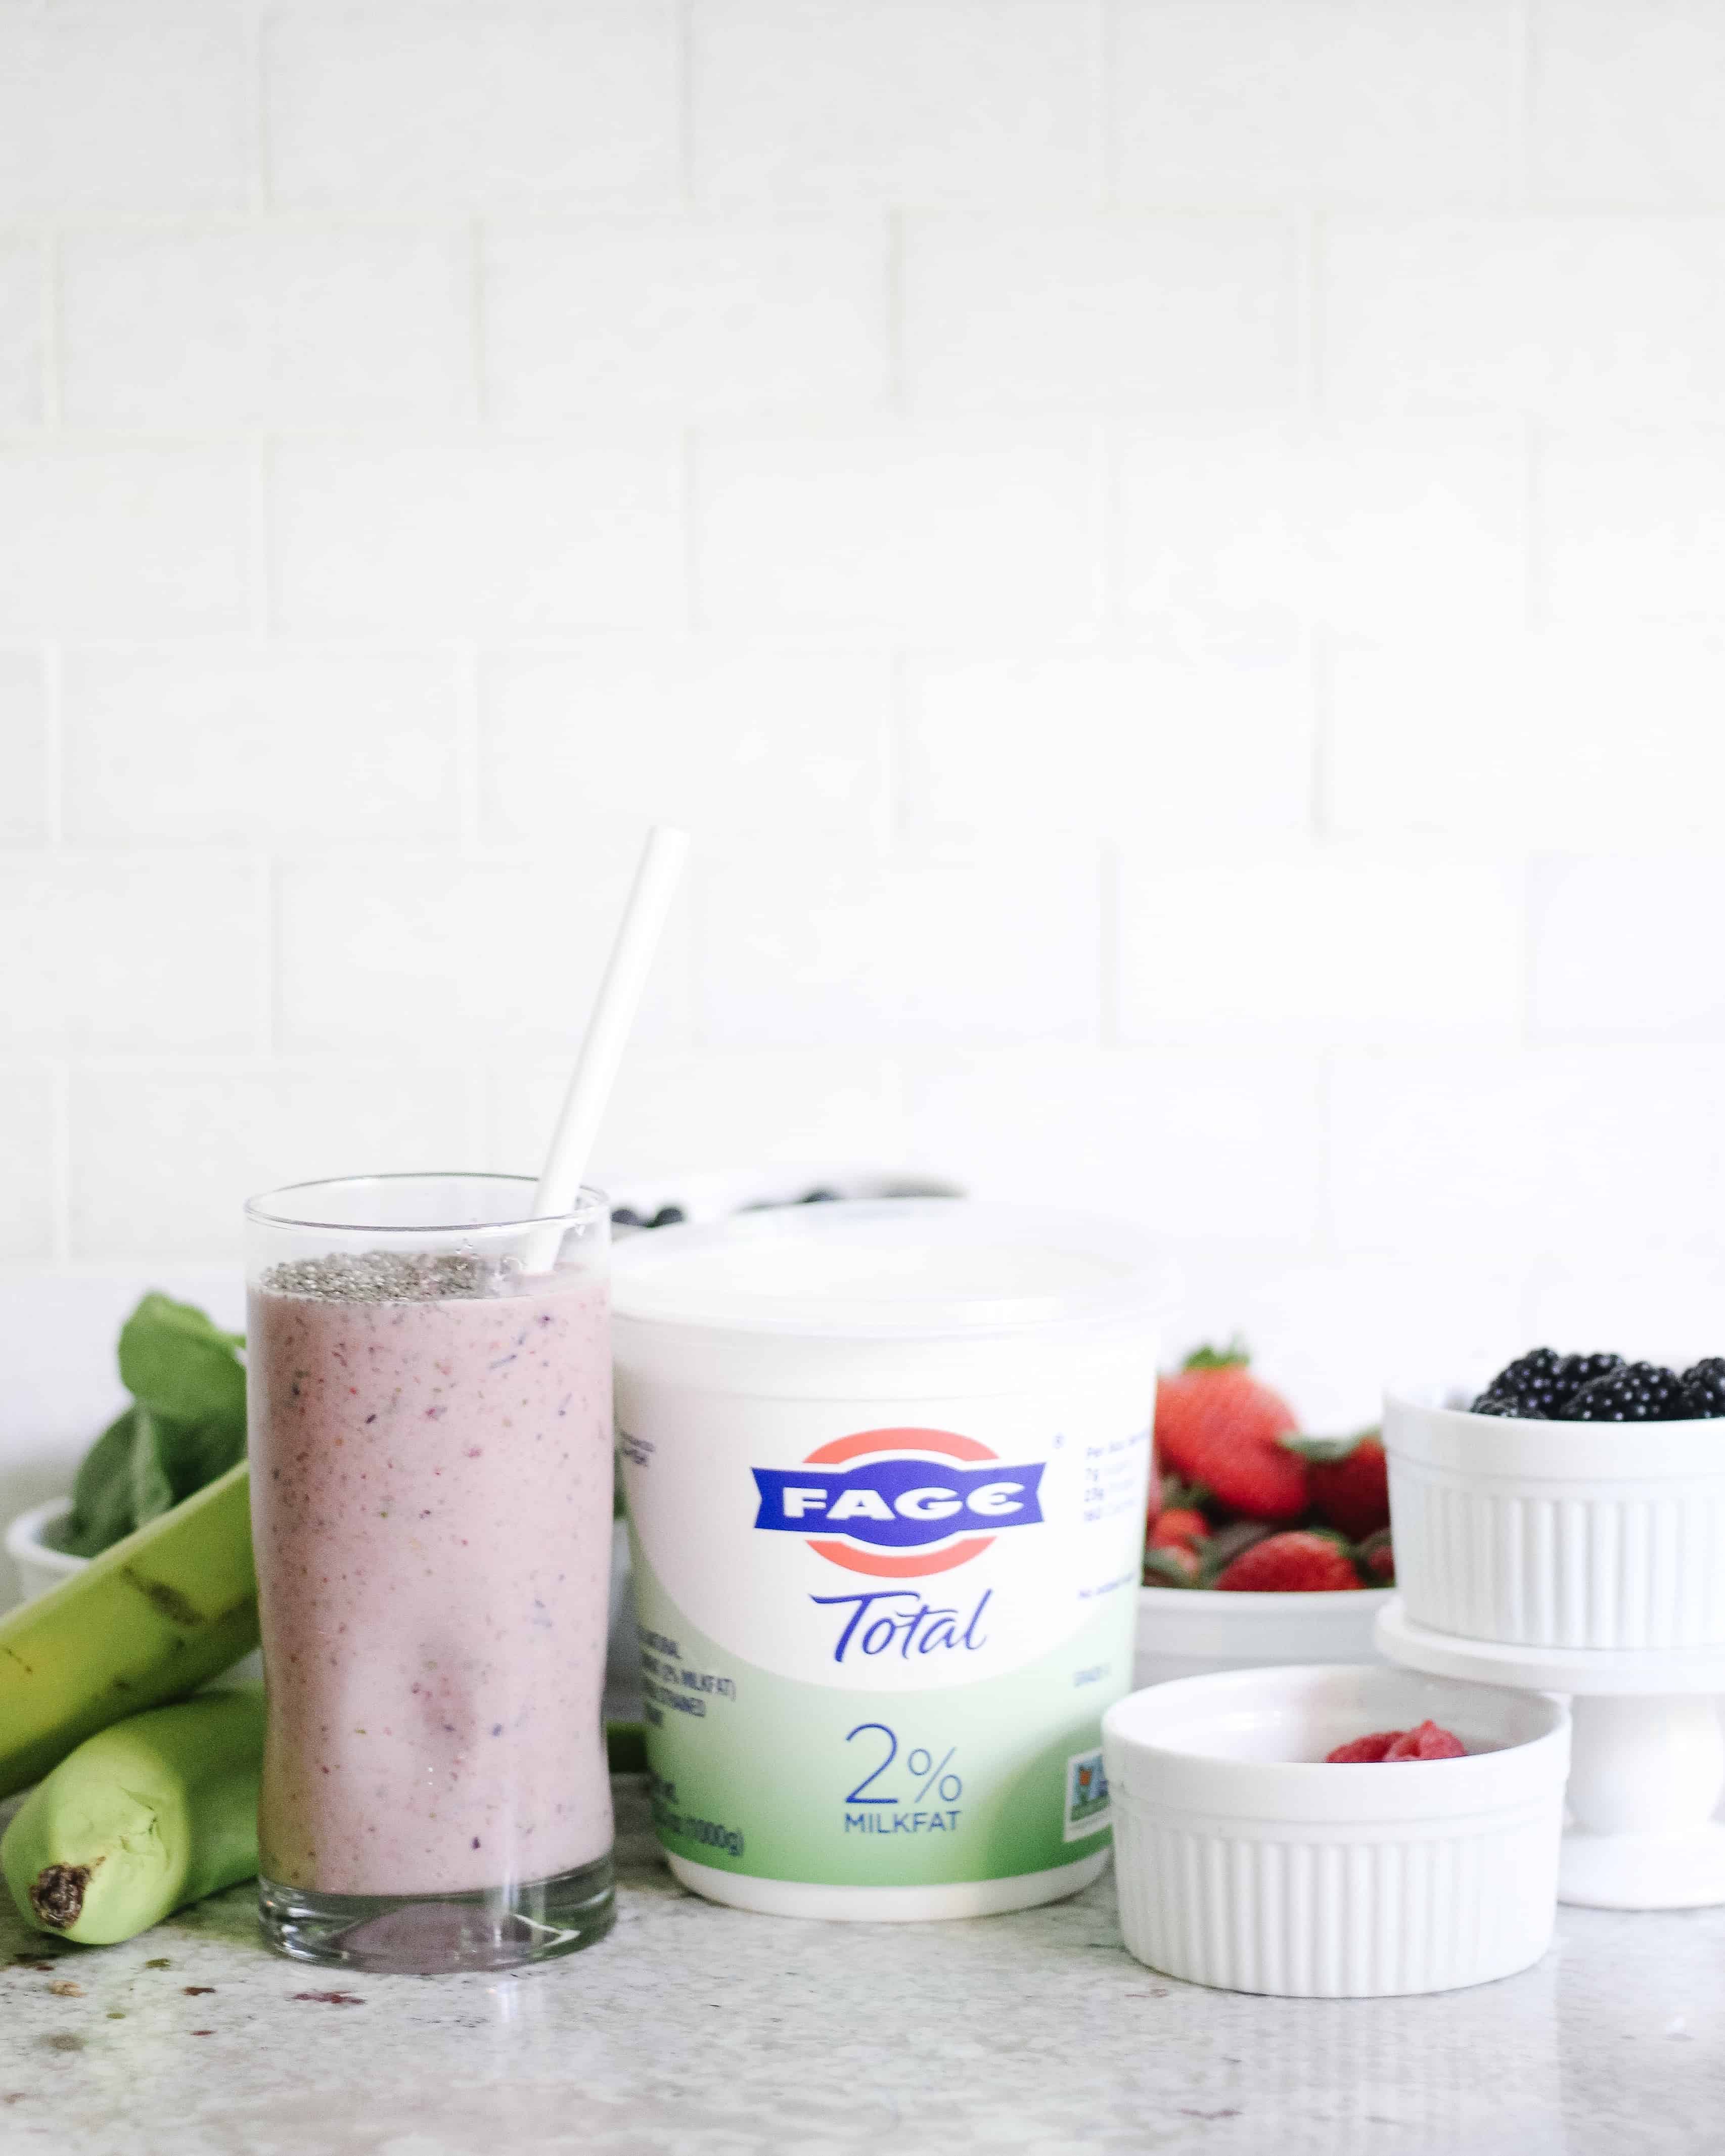 FAGE yogurt with smoothie and all the other ingredients